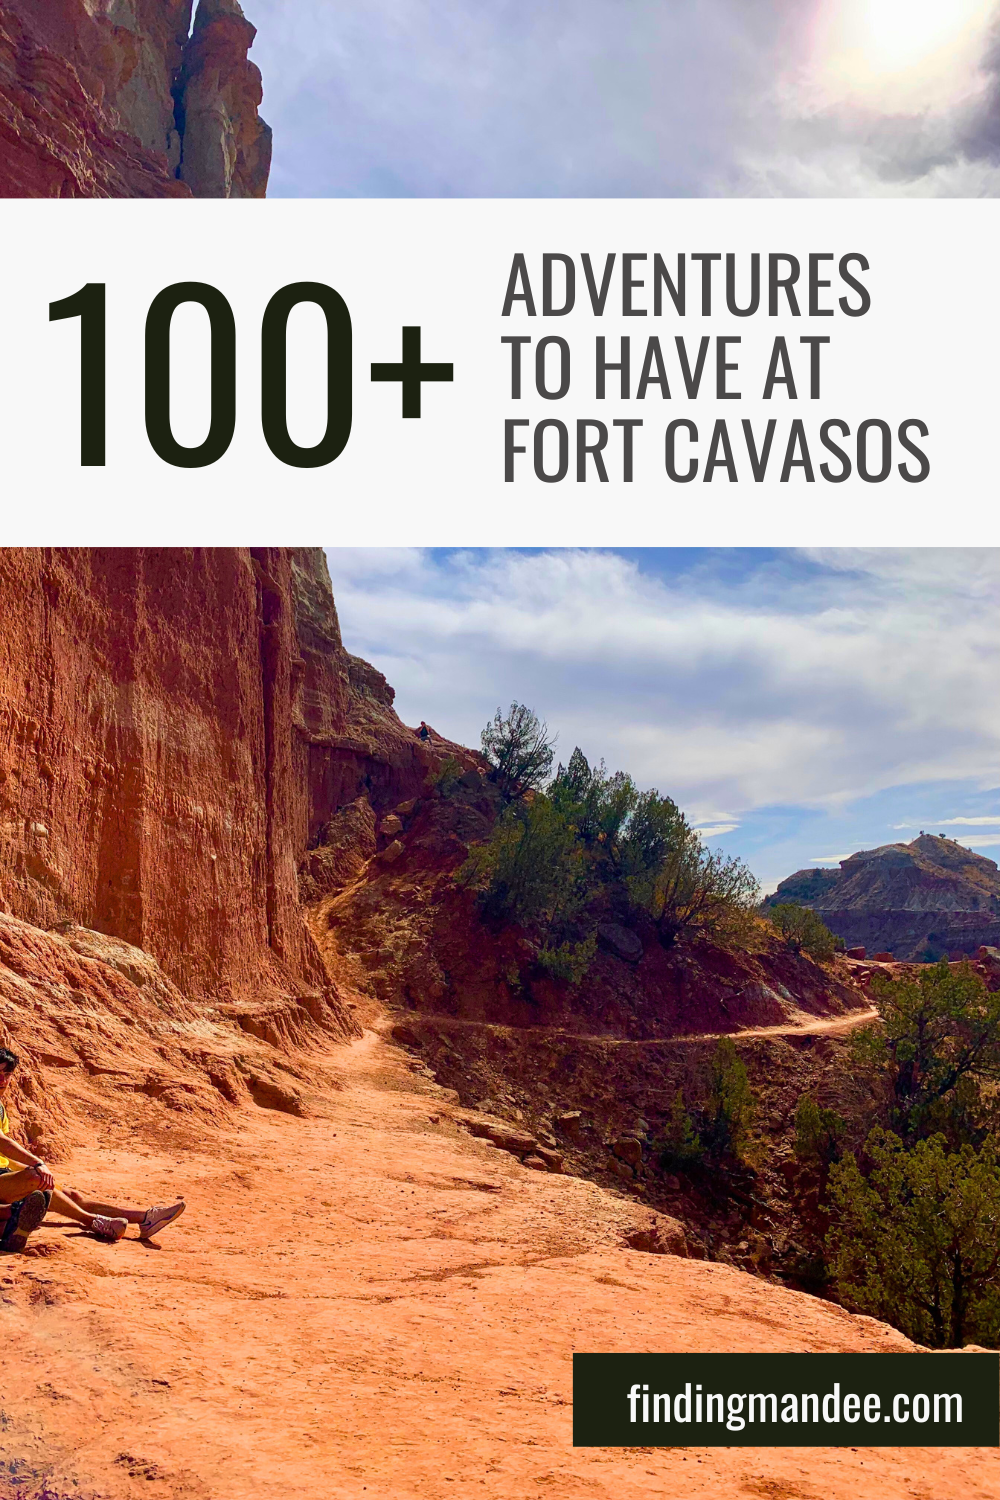 100+ Adventures to Have at Fort Cavasos | Finding Mandee